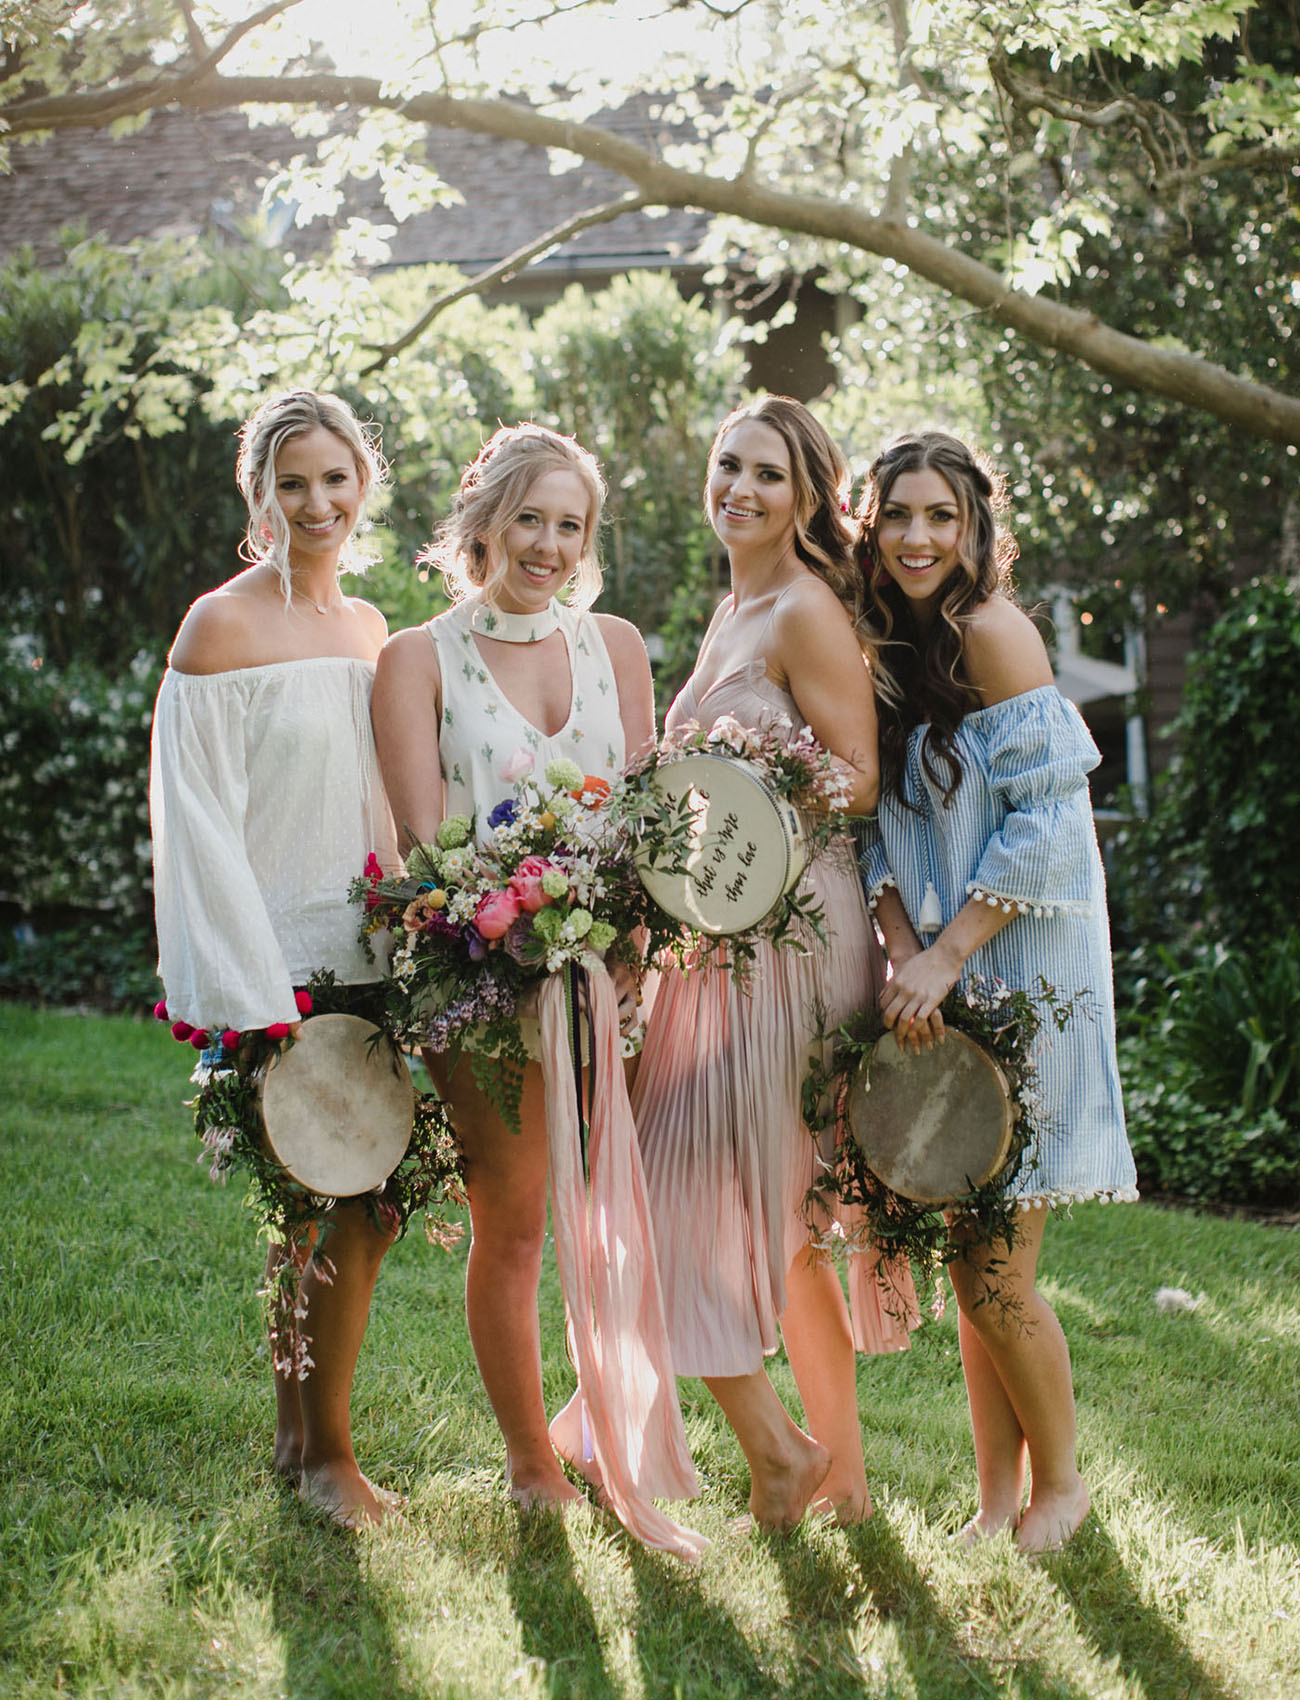 For the Bride-To-Be: A Woodsy Festival-Inspired Bridal Shower